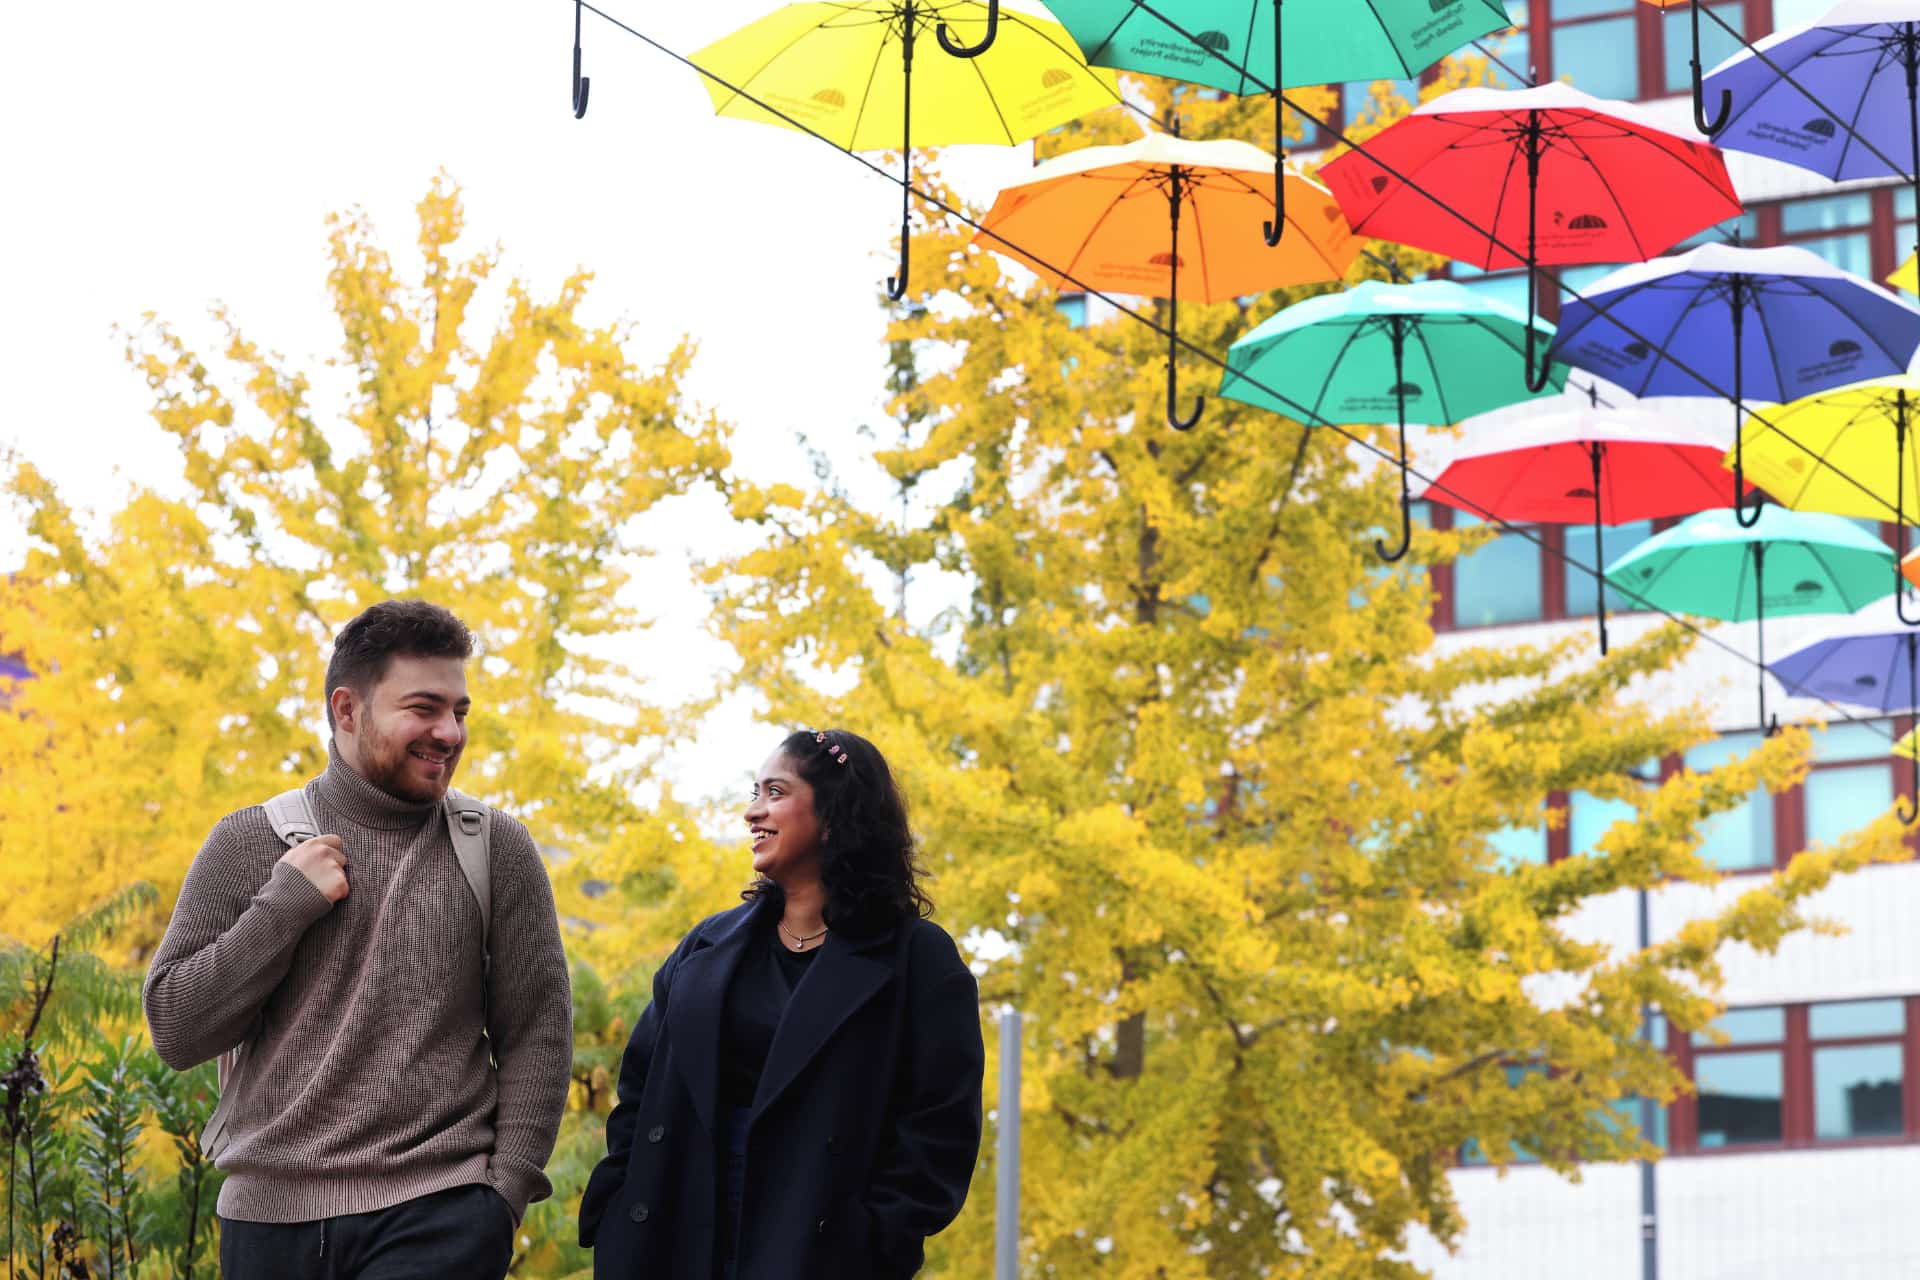 Two students walking on campus beneath the multicoloured umbrellas on campus.